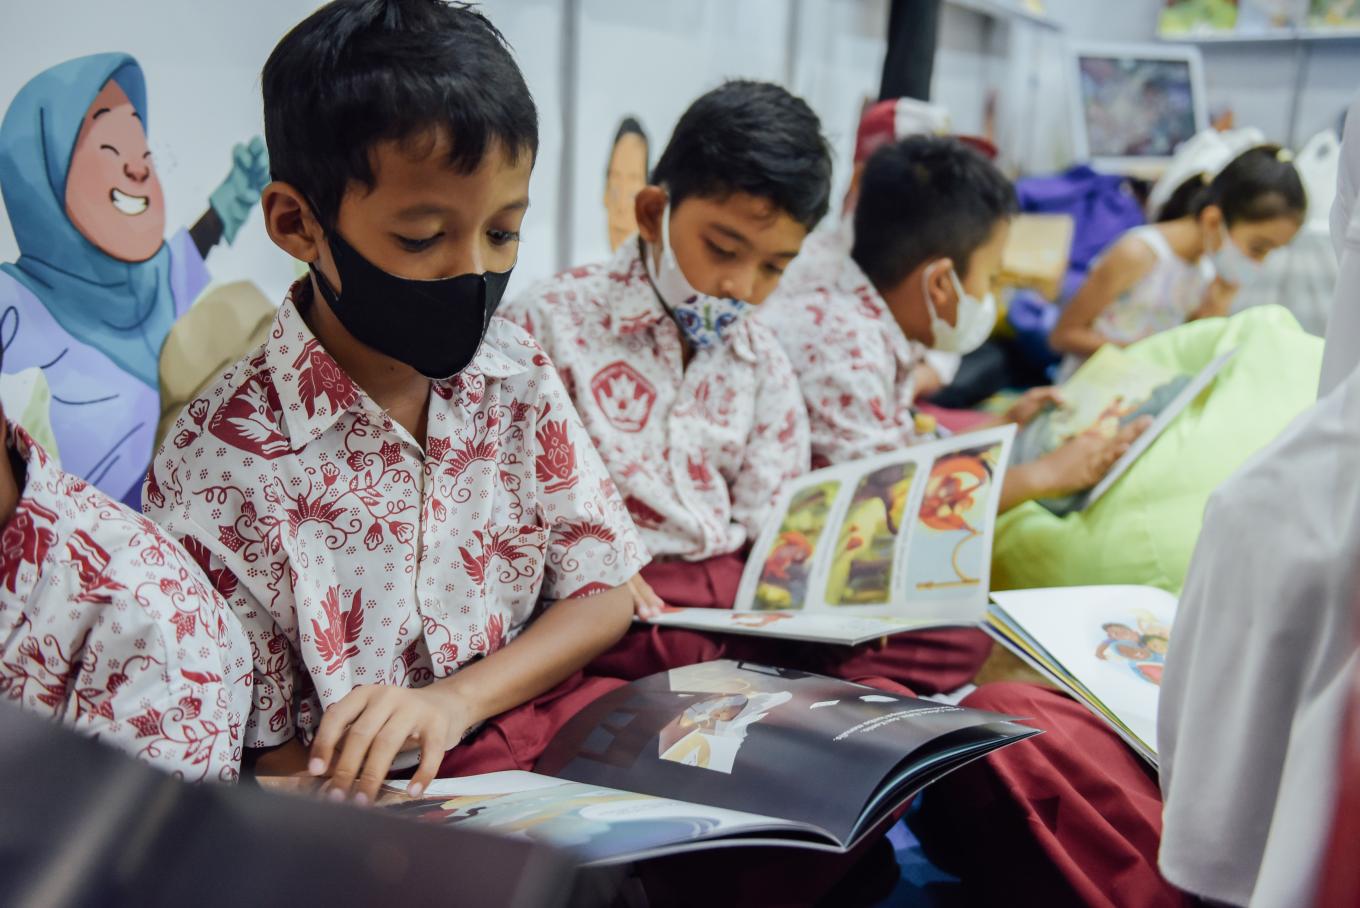 Children read the Children read the “Becoming a Changemaker” series at the Indonesia International Book Fair